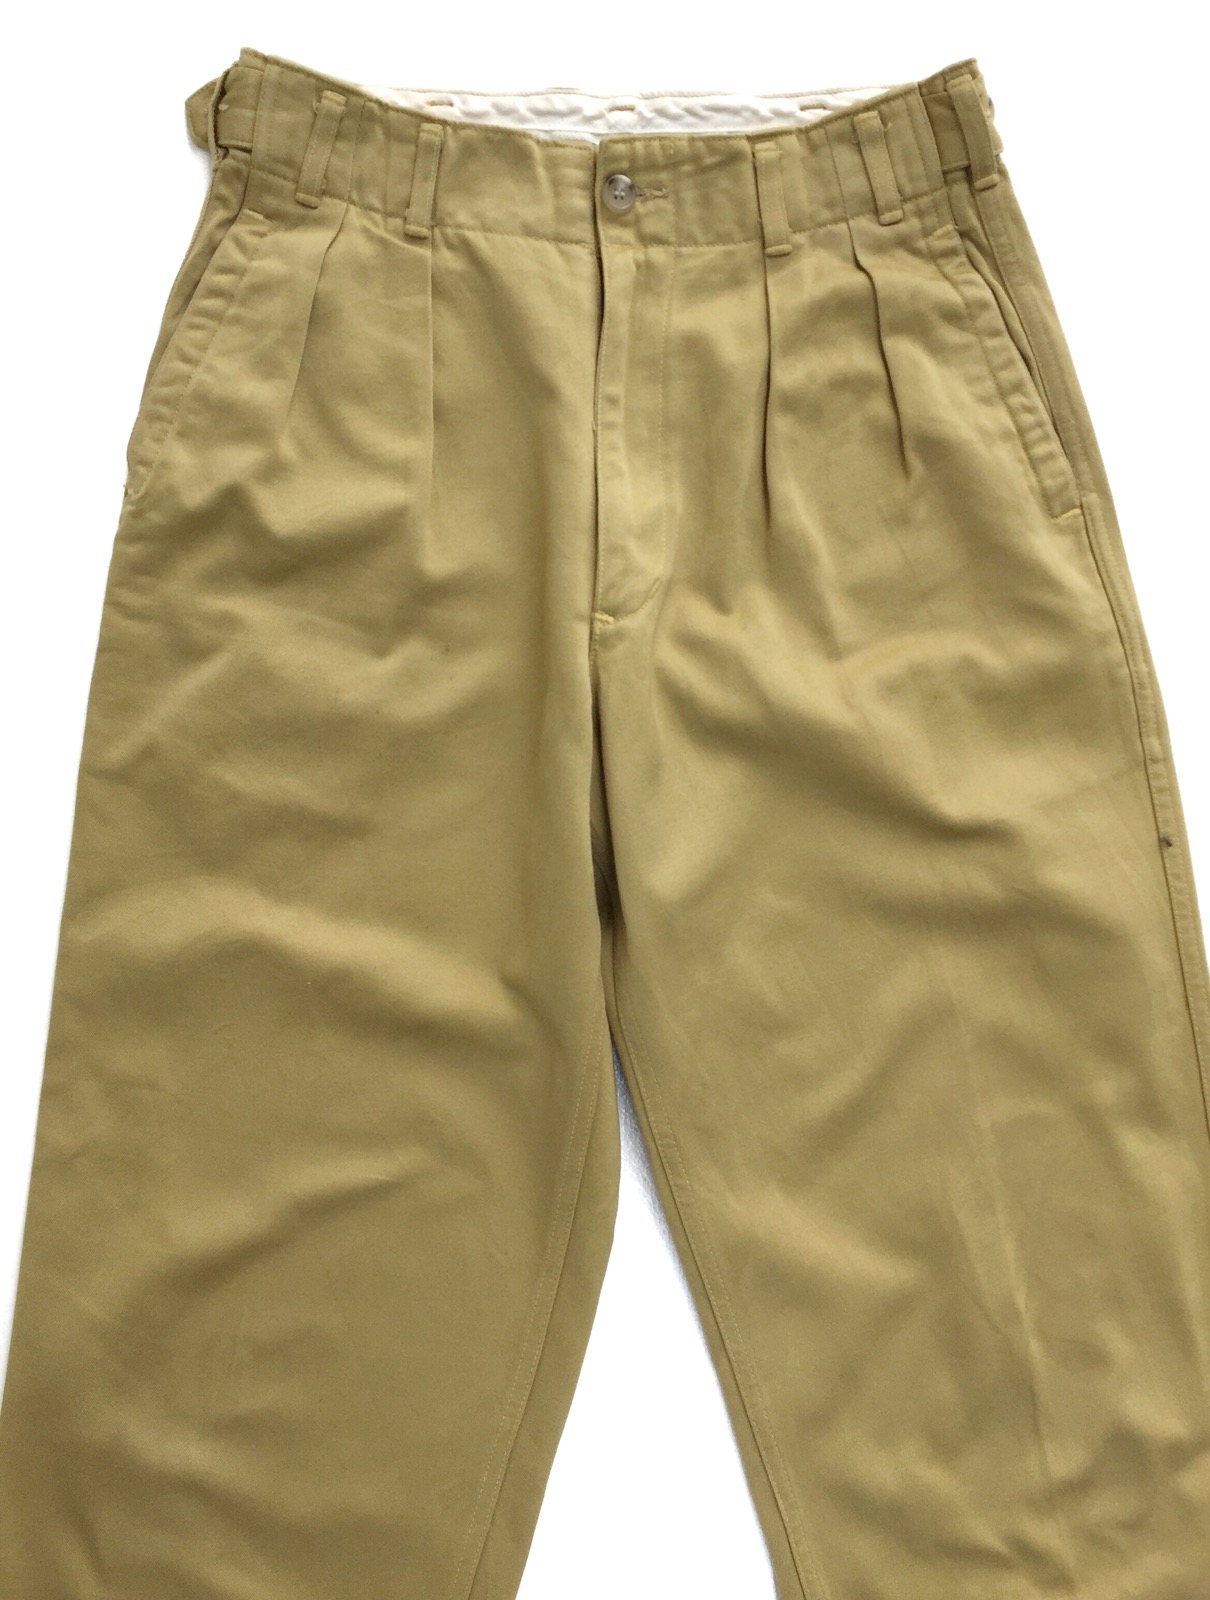 Nigel Cabourn Military Army Design Baggy Trousers Pants - 3